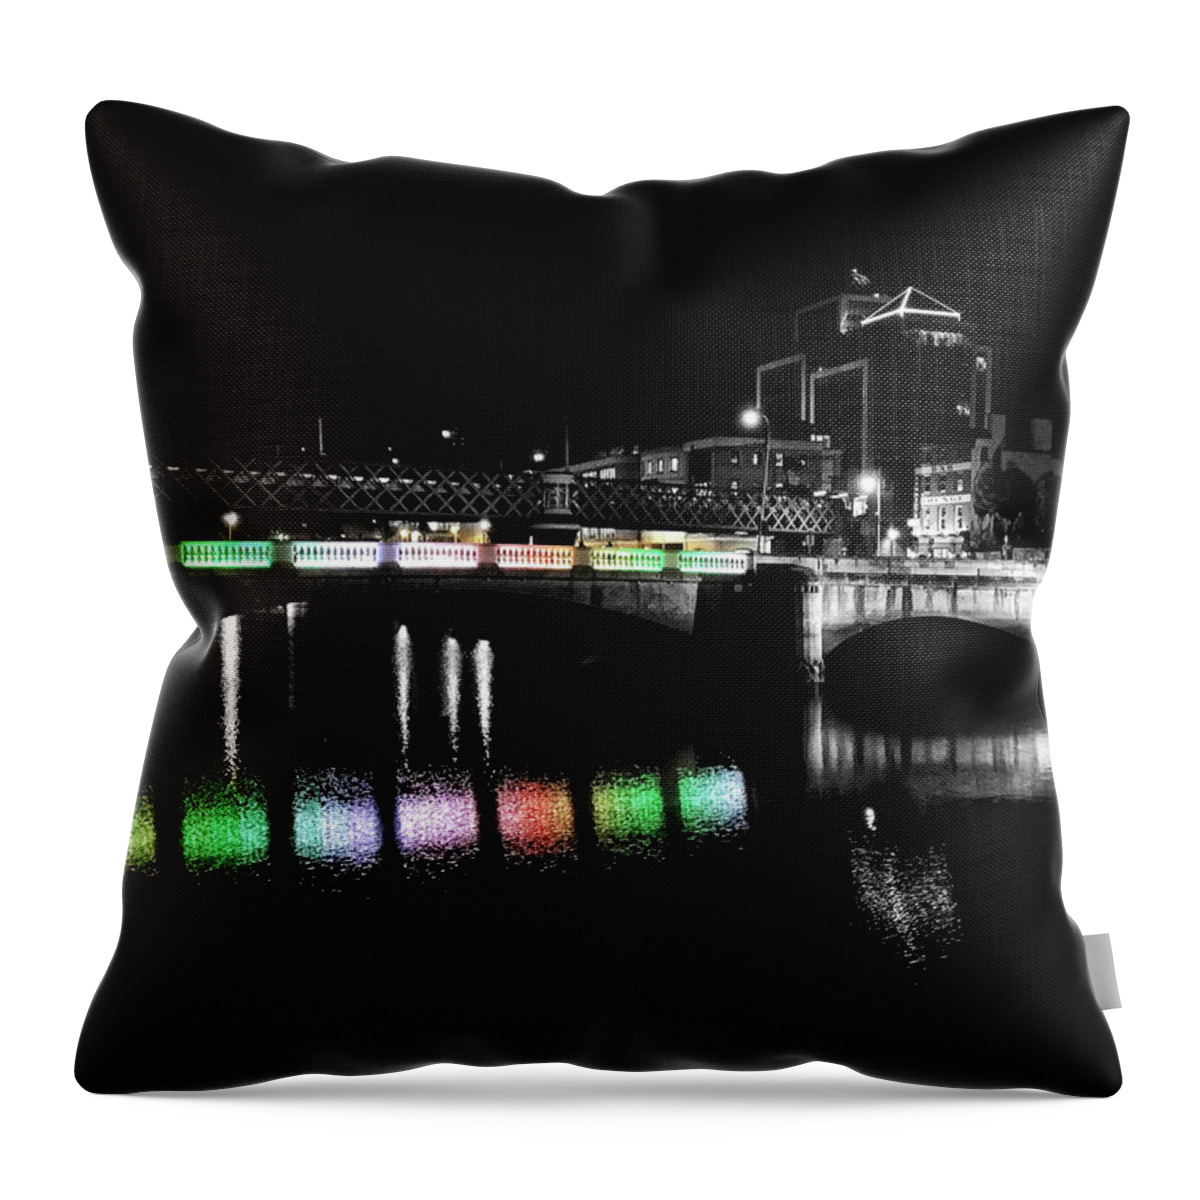 River Liffey Throw Pillow featuring the photograph River Liffey Reflections by Andrea Platt